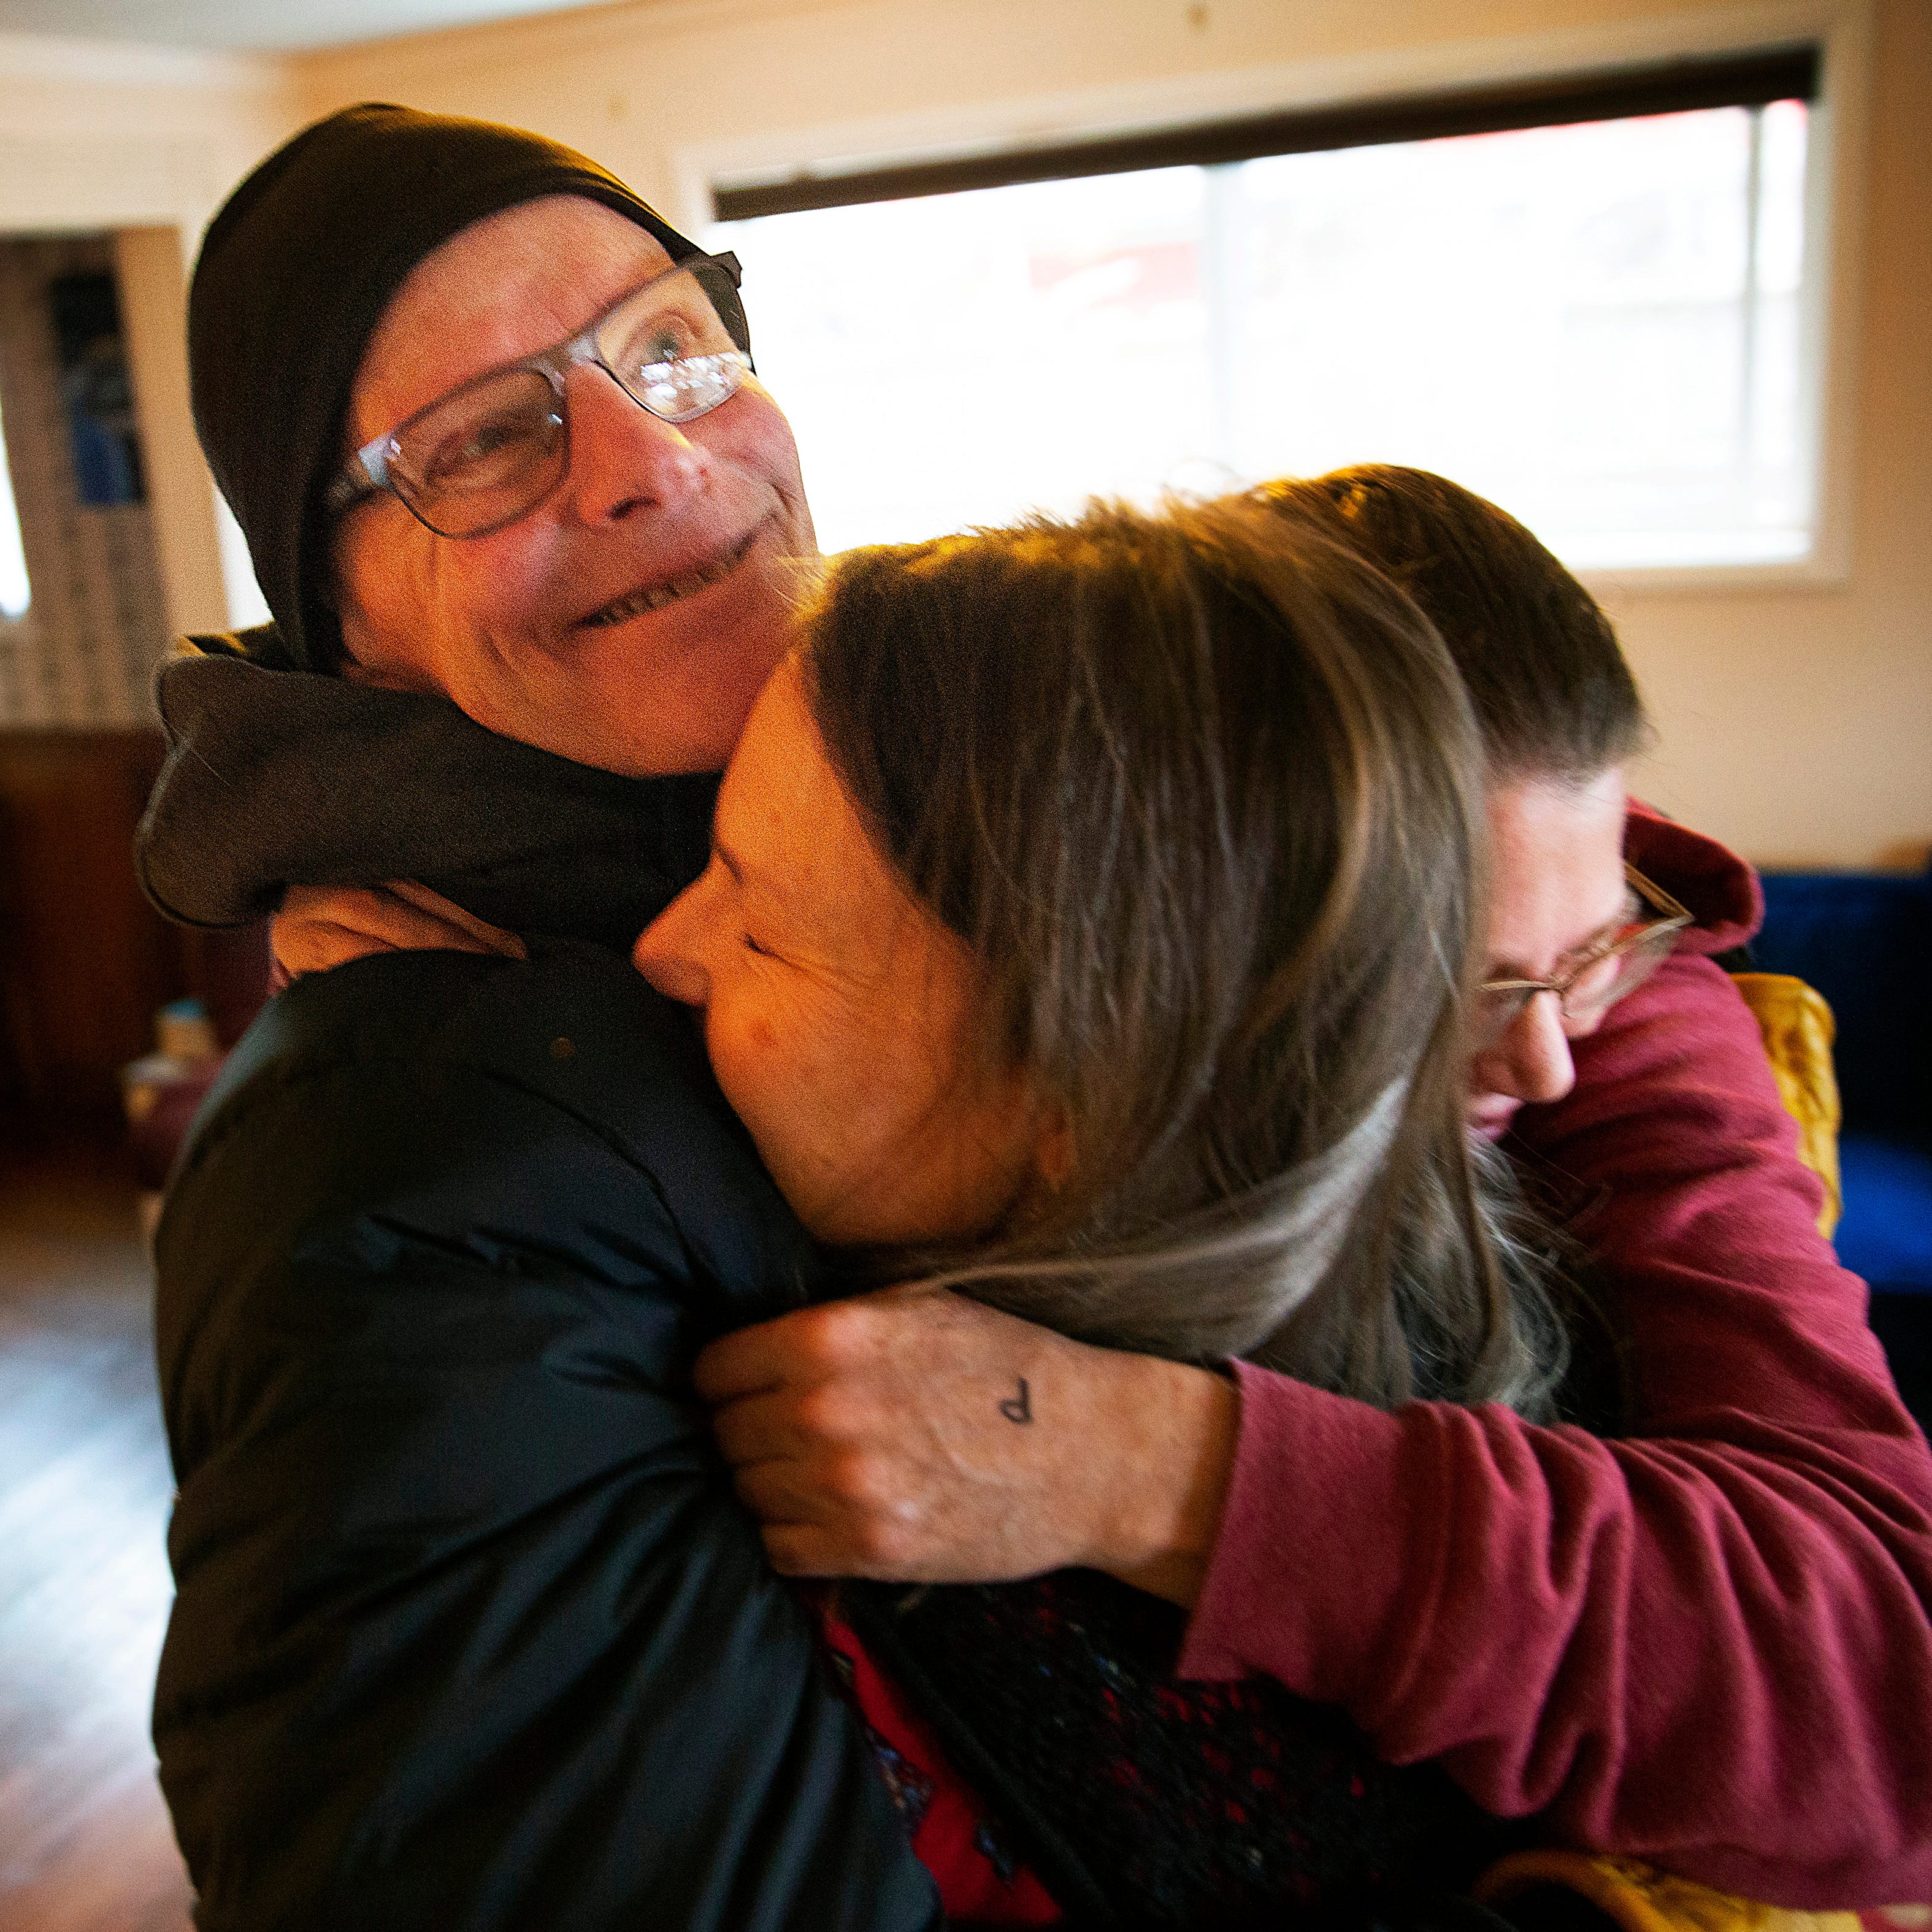 Steve Connelly, left, shares an embrace with death doula Amy May and his wife Becky Connelly after a counseling session in January. Steve is battling pancreatic cancer.